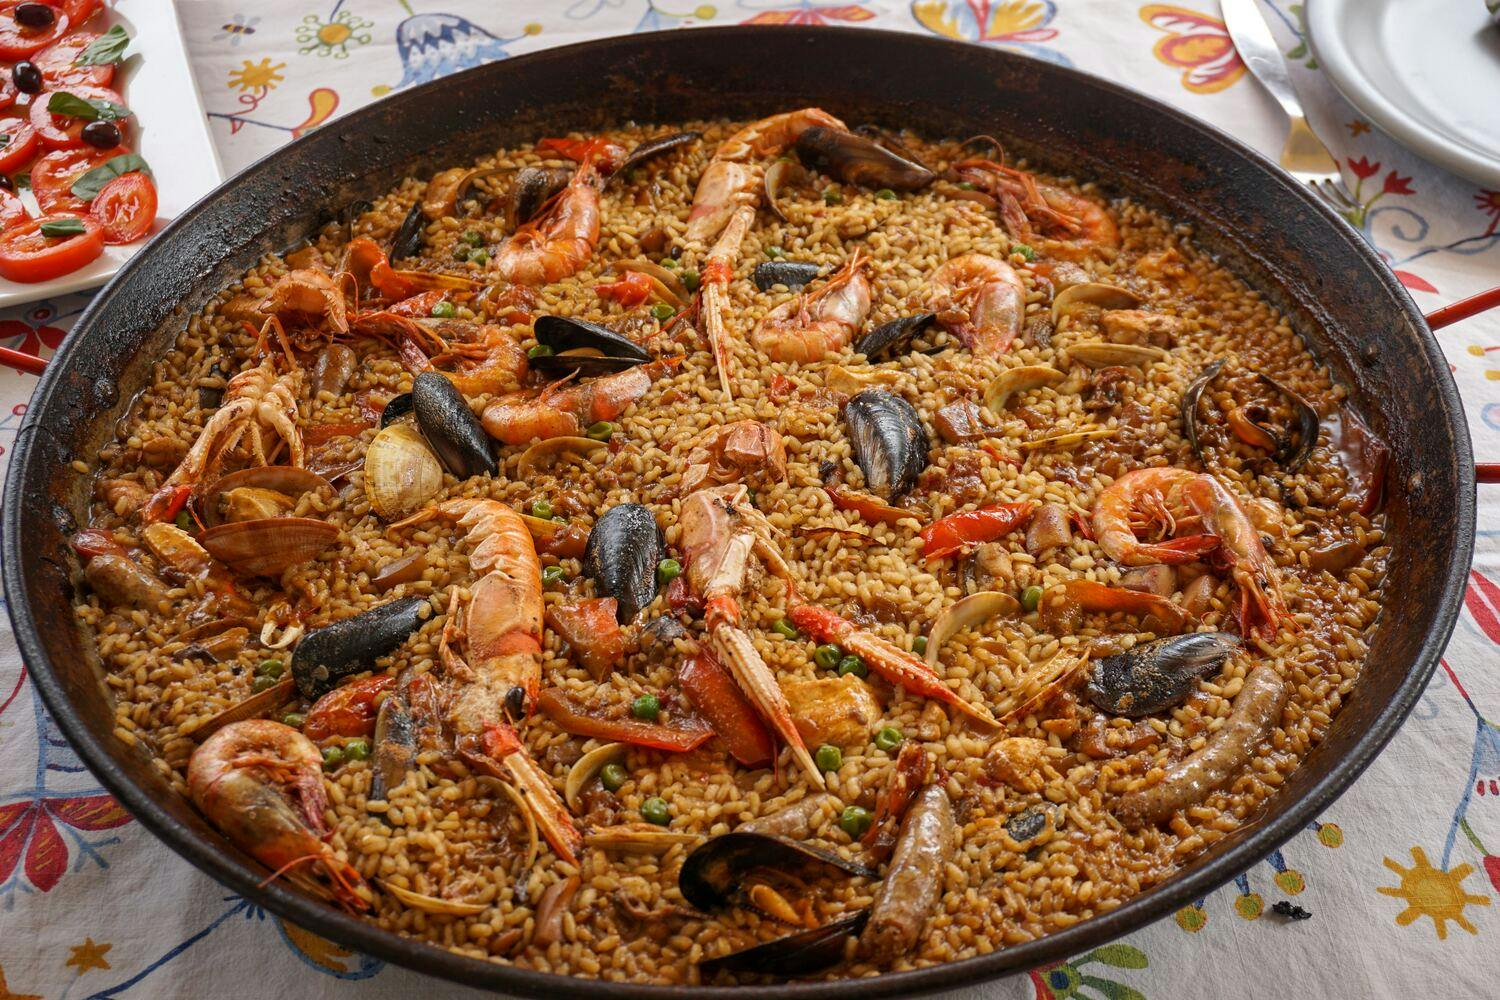 Traditional paella from Valencia